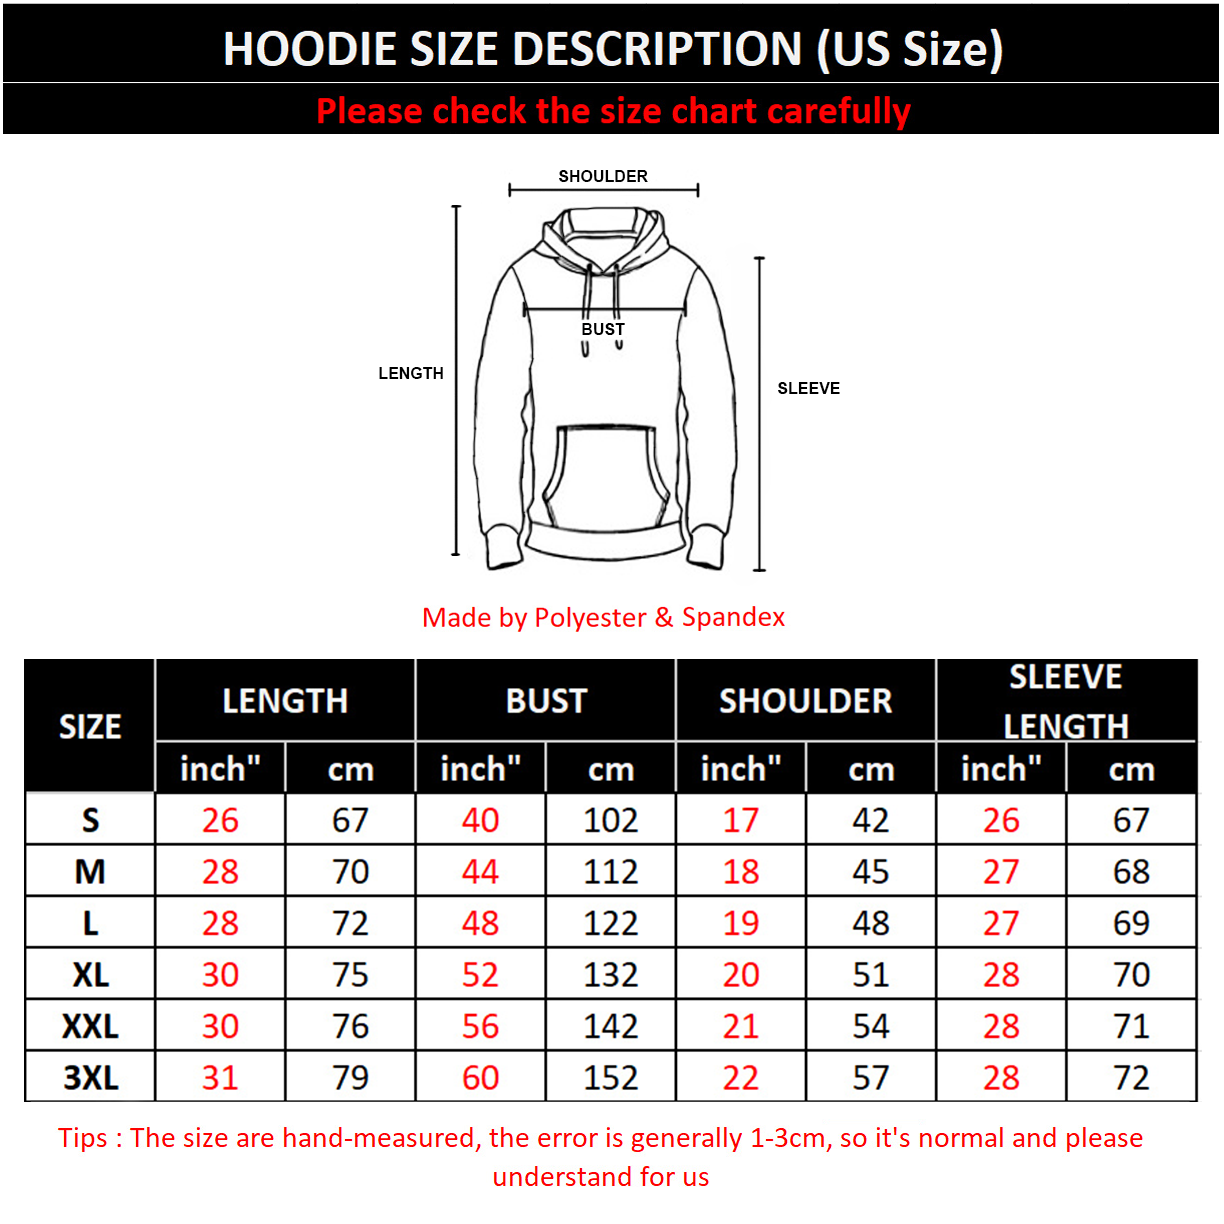 Horse Hoodie - All Over V2